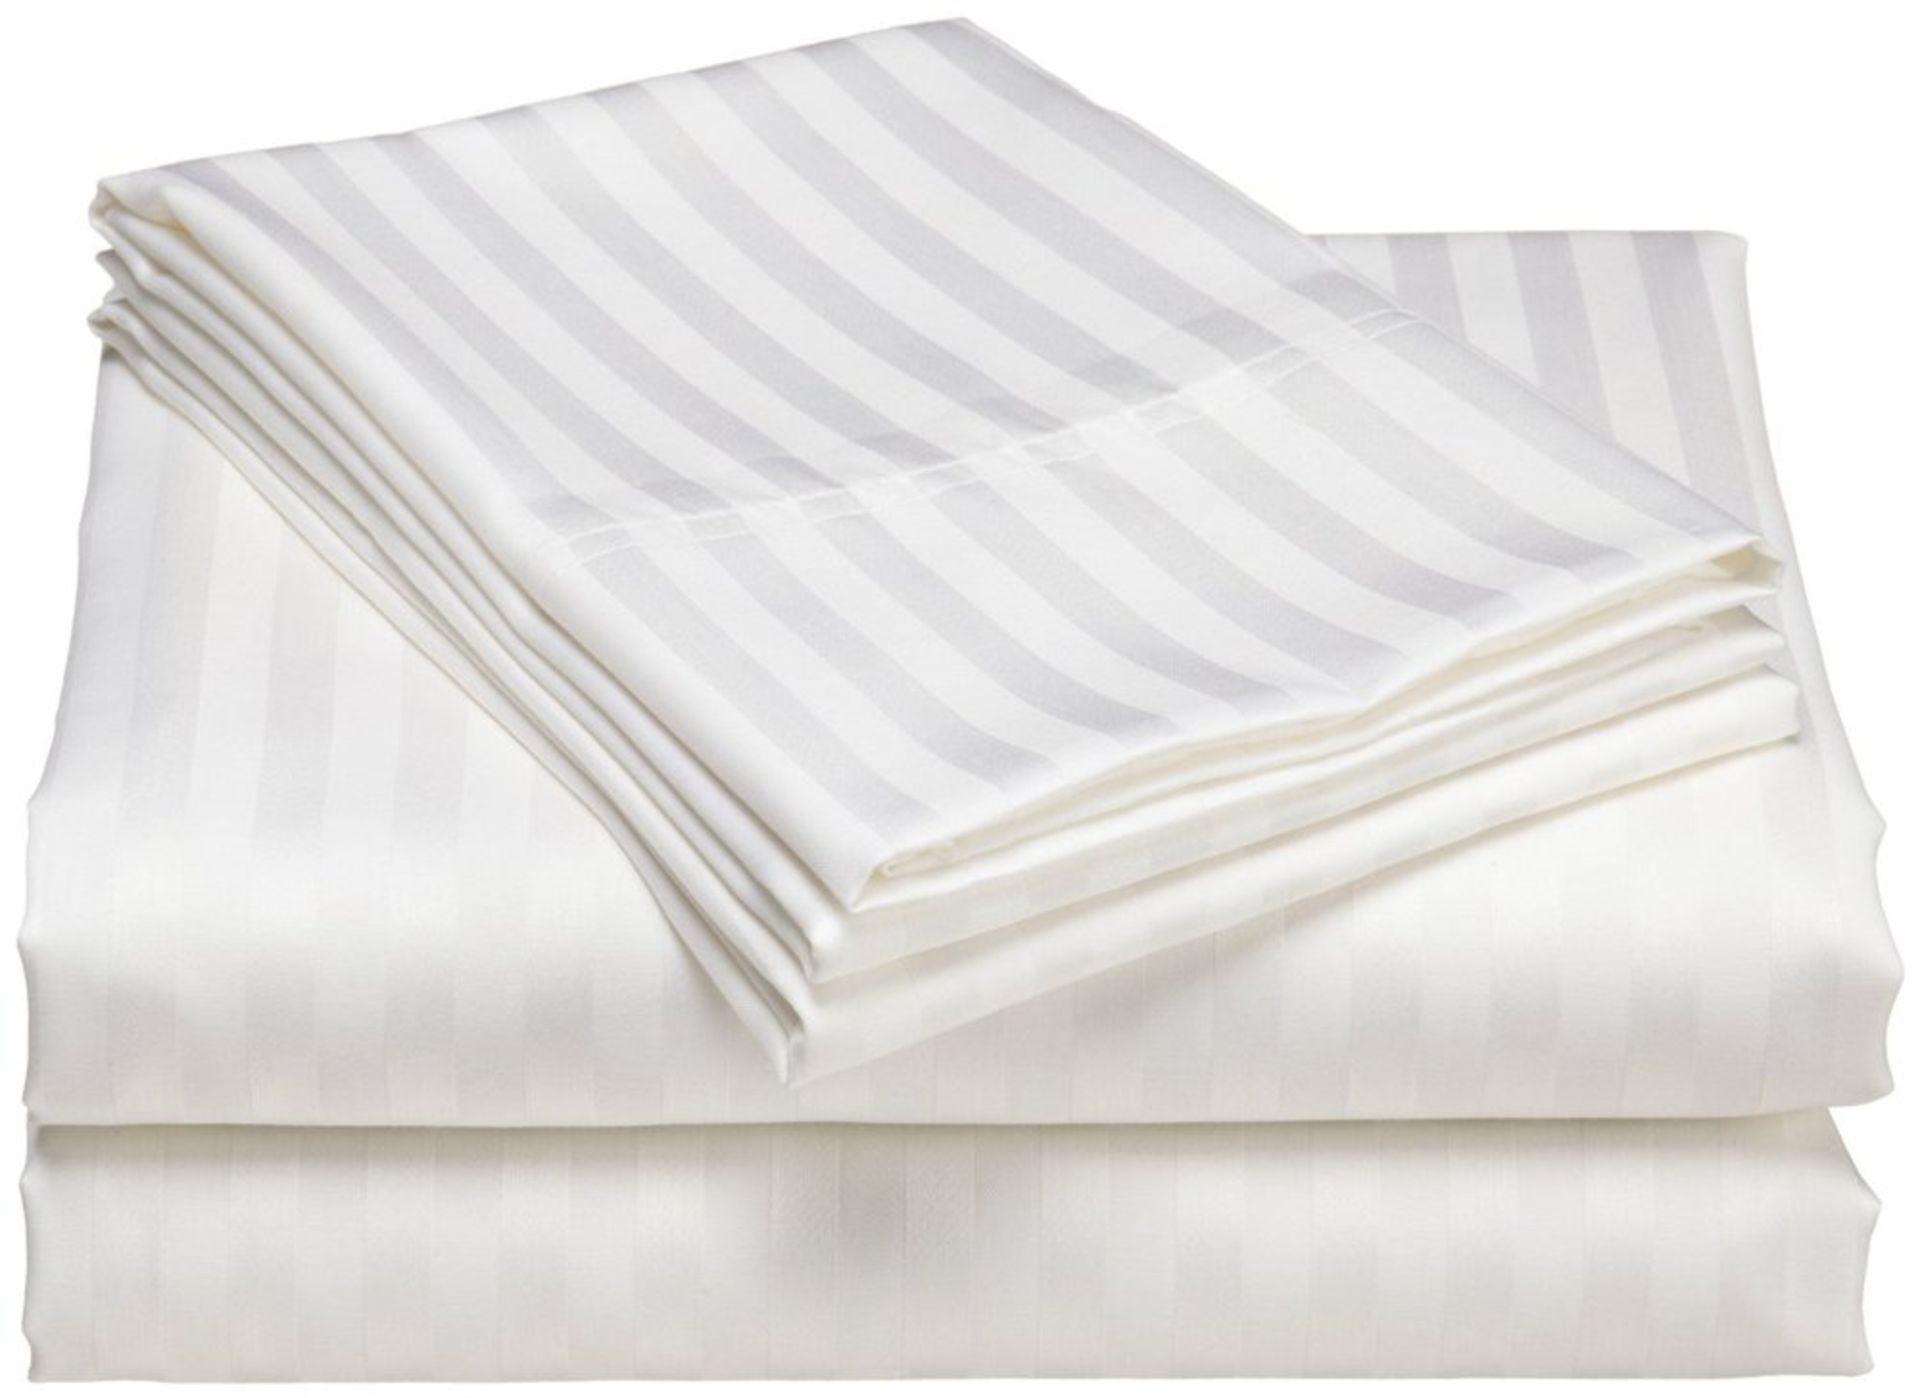 V *TRADE QTY* Brand New 100% Egyptian Cotton Double Size Fitted Sheet RRP £25.50 X 20 Bid price to